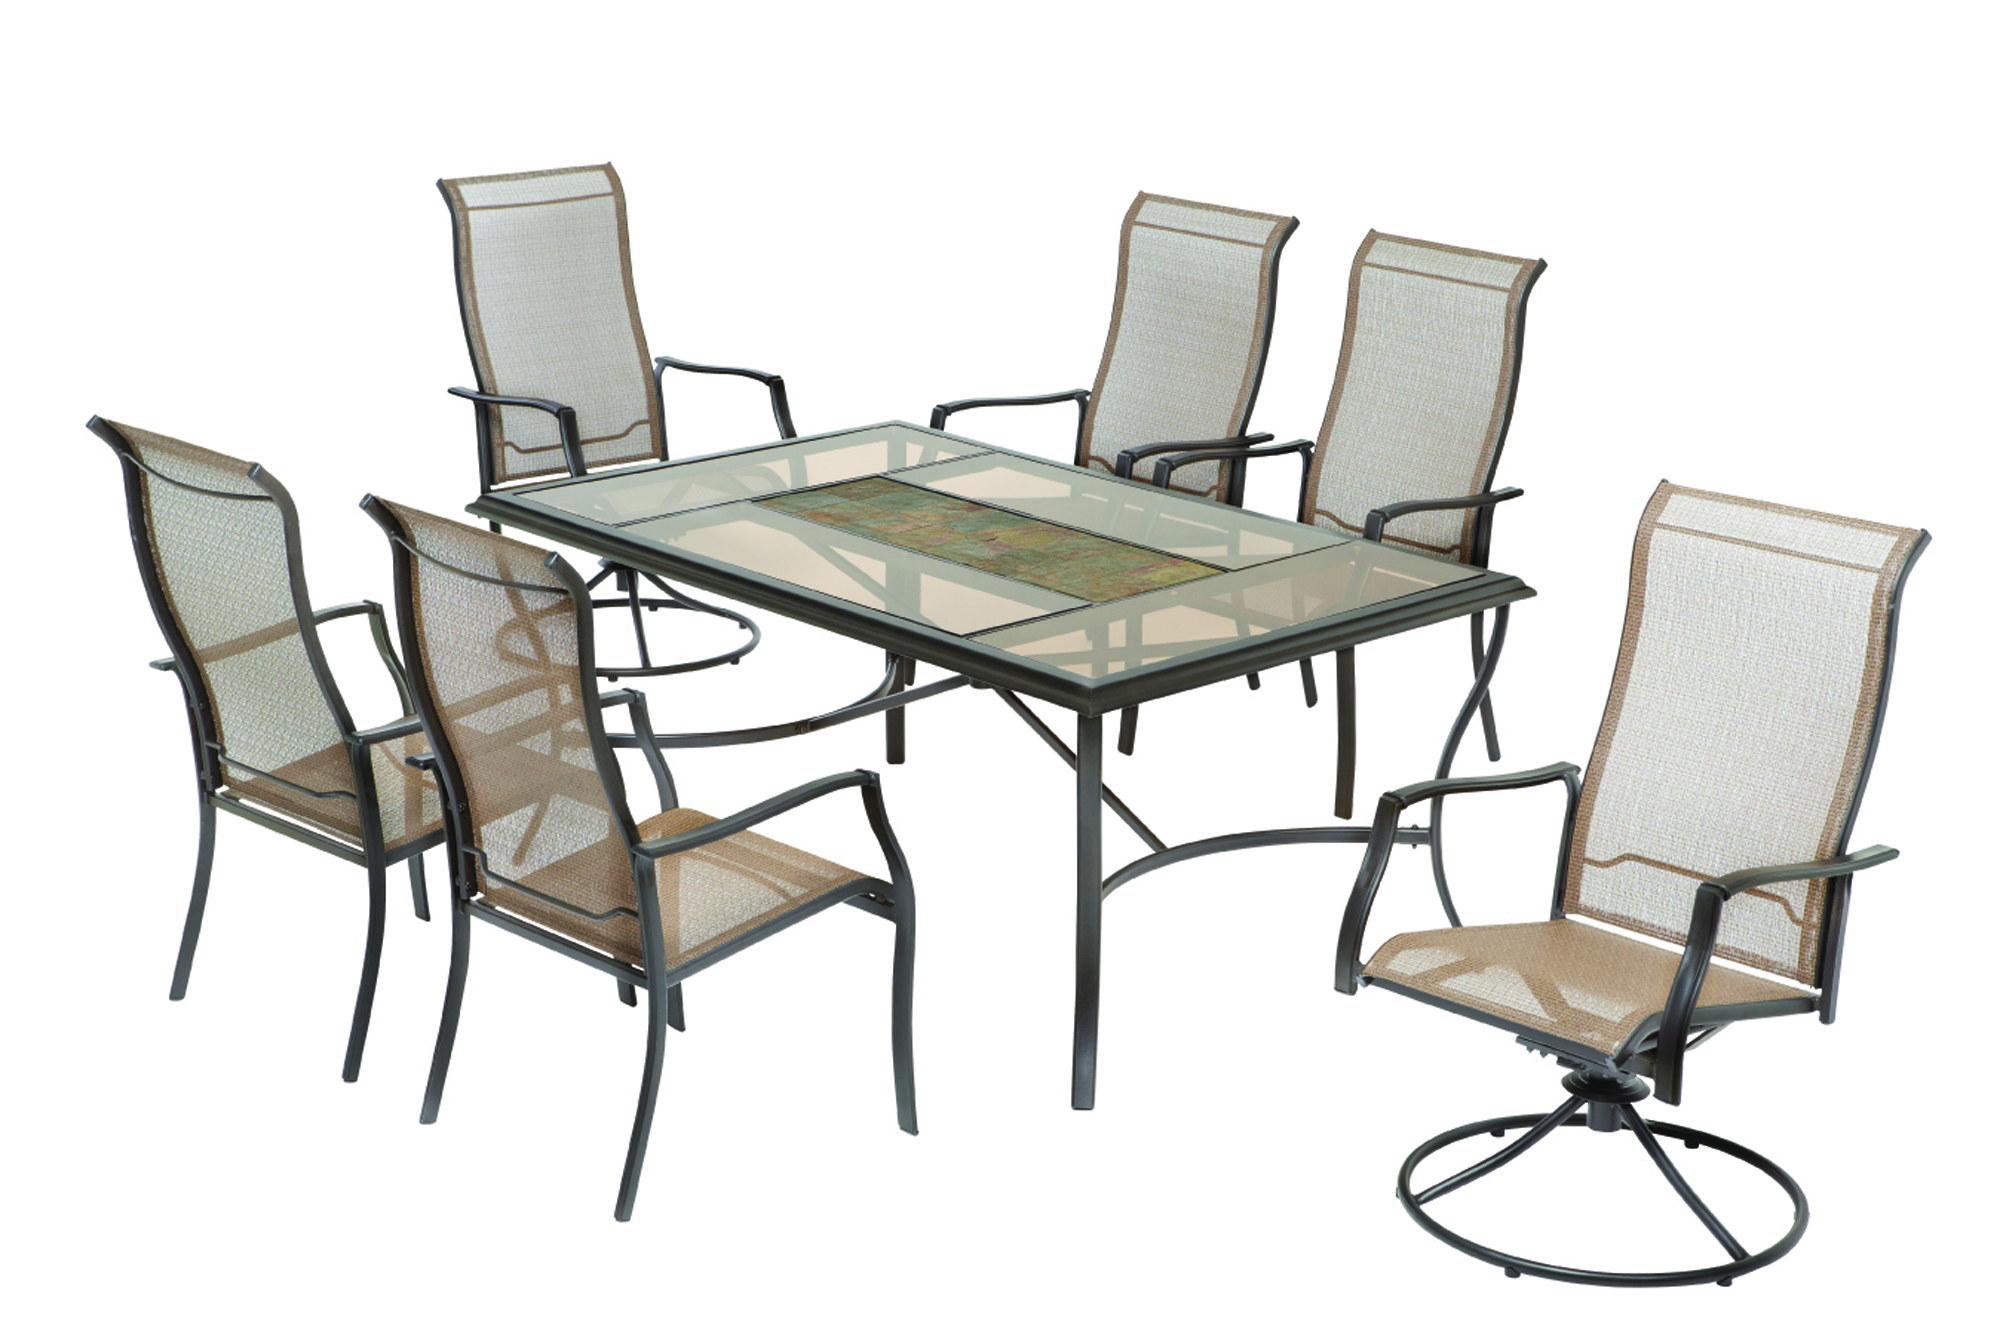 patio-chairs-sold-at-home-depot-recalled-because-porch-life-shouldn-t